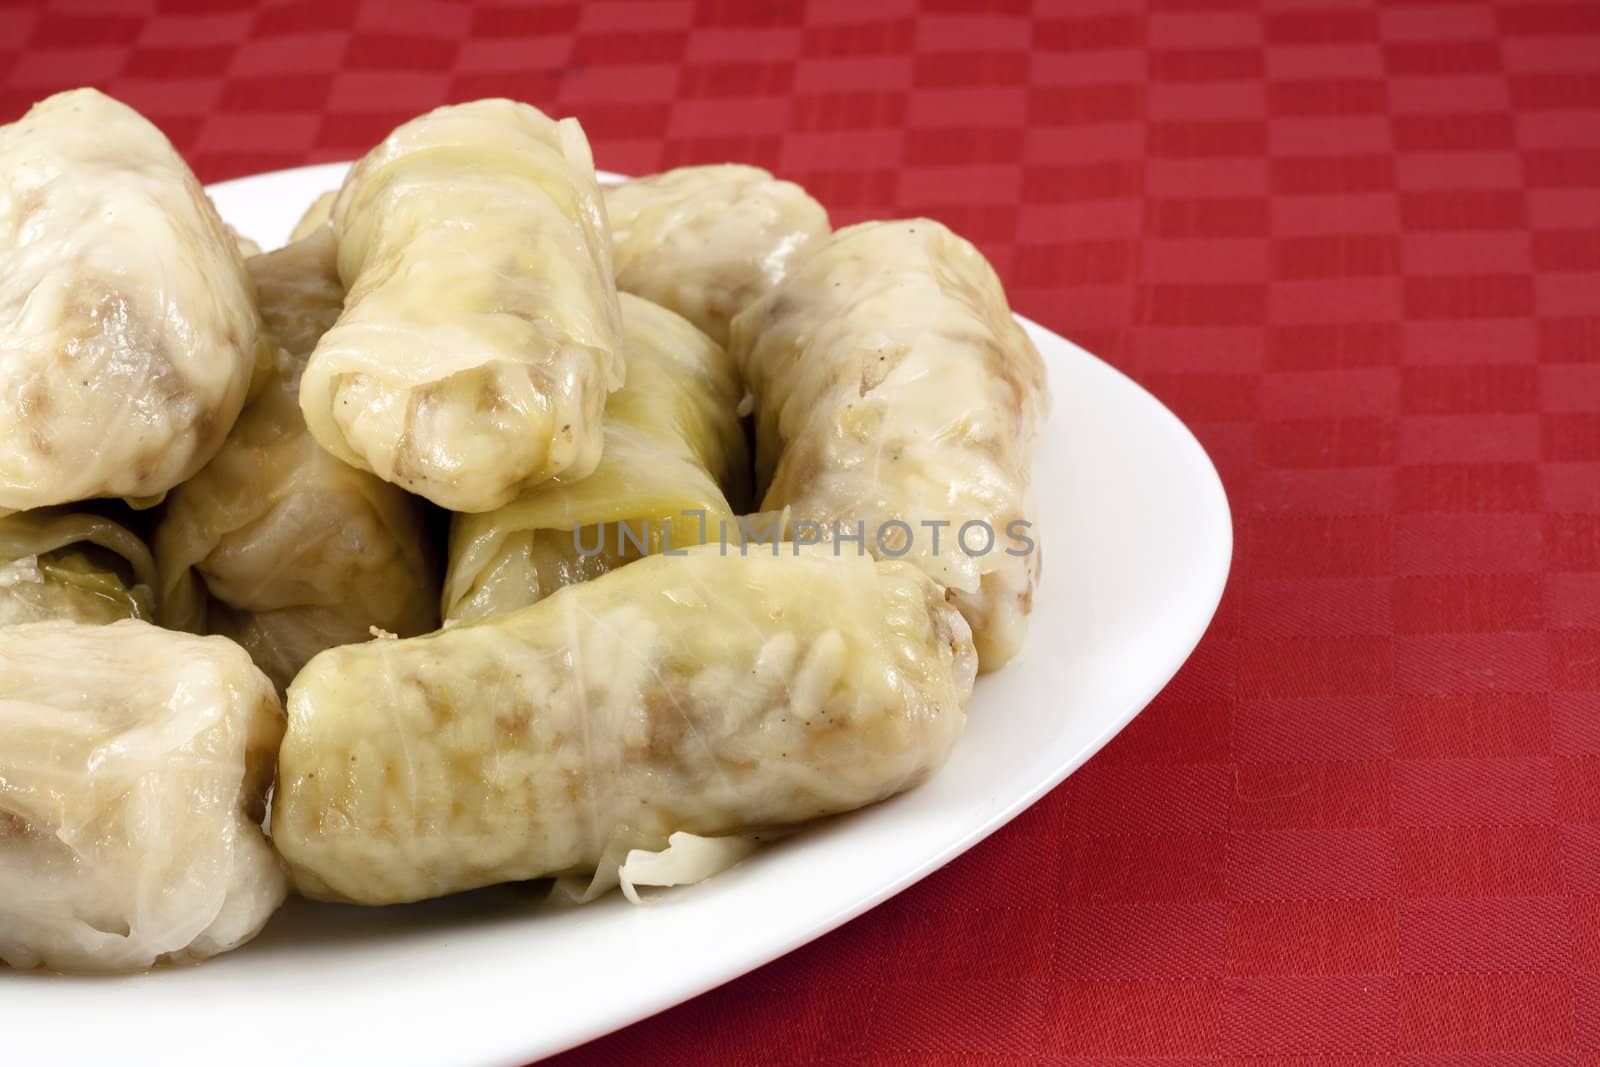 Cabbage rolls (sarma) stuffed with rice and meat.